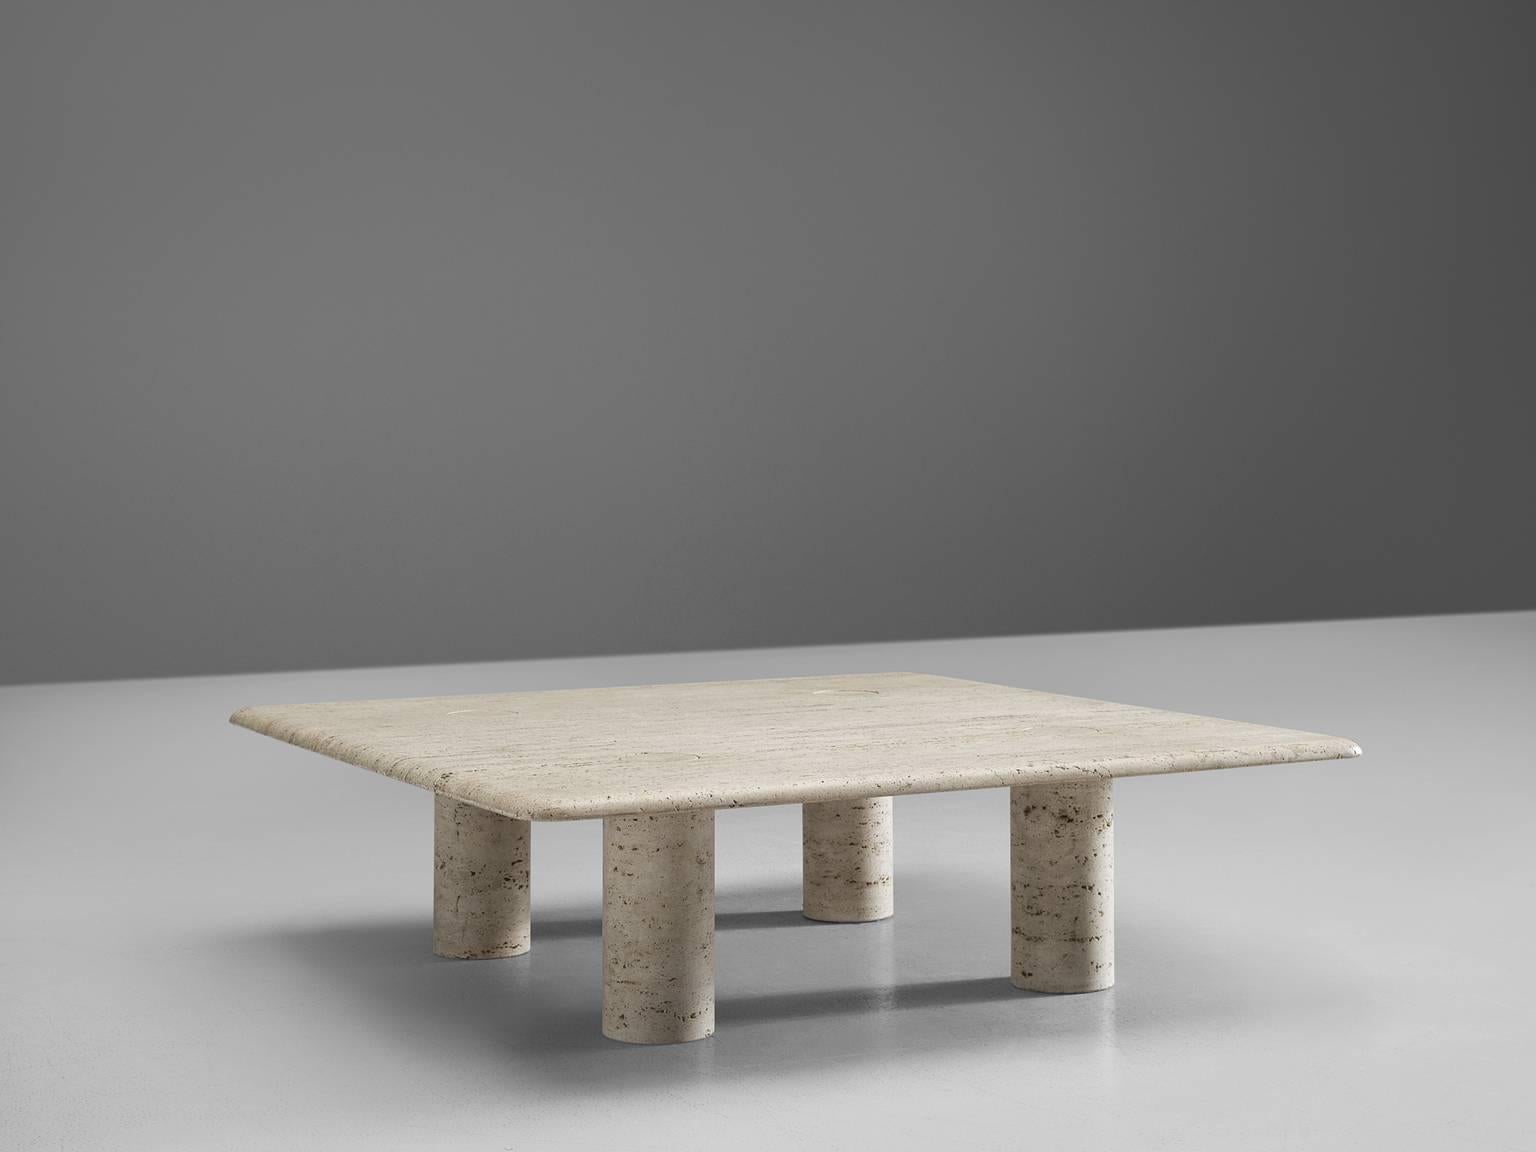 Coffee table in travertine, by Angelo Mangiarotti for Up&Up, Italy, 1970s.

This large sculptural table by Angelo Mangiarotti is a skillful example of postmodern design (we also have a smaller version). The cocktail table is executed in travertin.